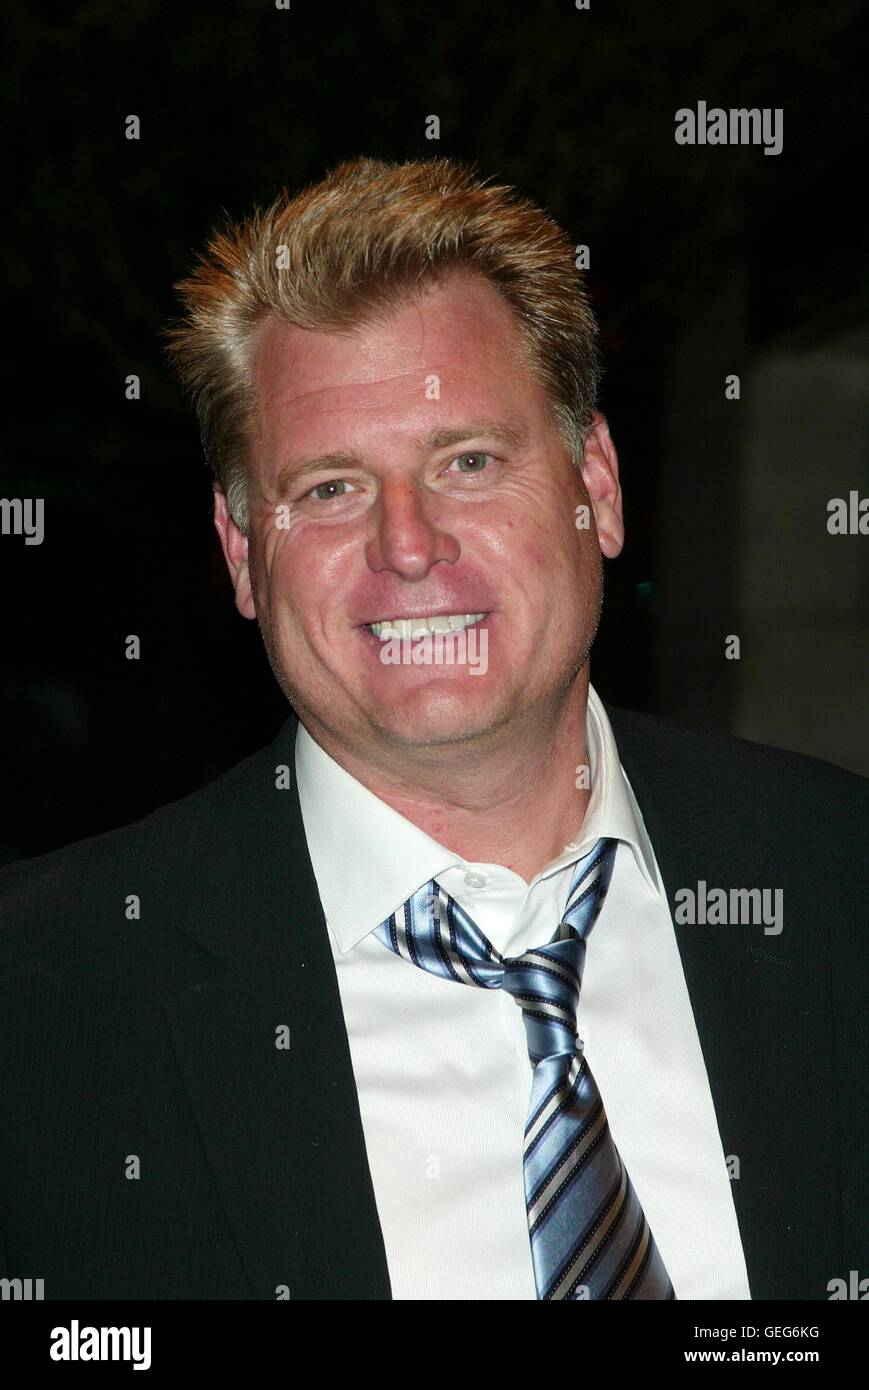 Joe Simpson, father of Jessica & Ashlee Simpson, spotted out & about in NYC. Joe is in town to promote his new ABC TV show called Women's Murder Club, in which he is one of the executive producers. May 16, 2007 © Marzullo/MediaPunch. Stock Photo